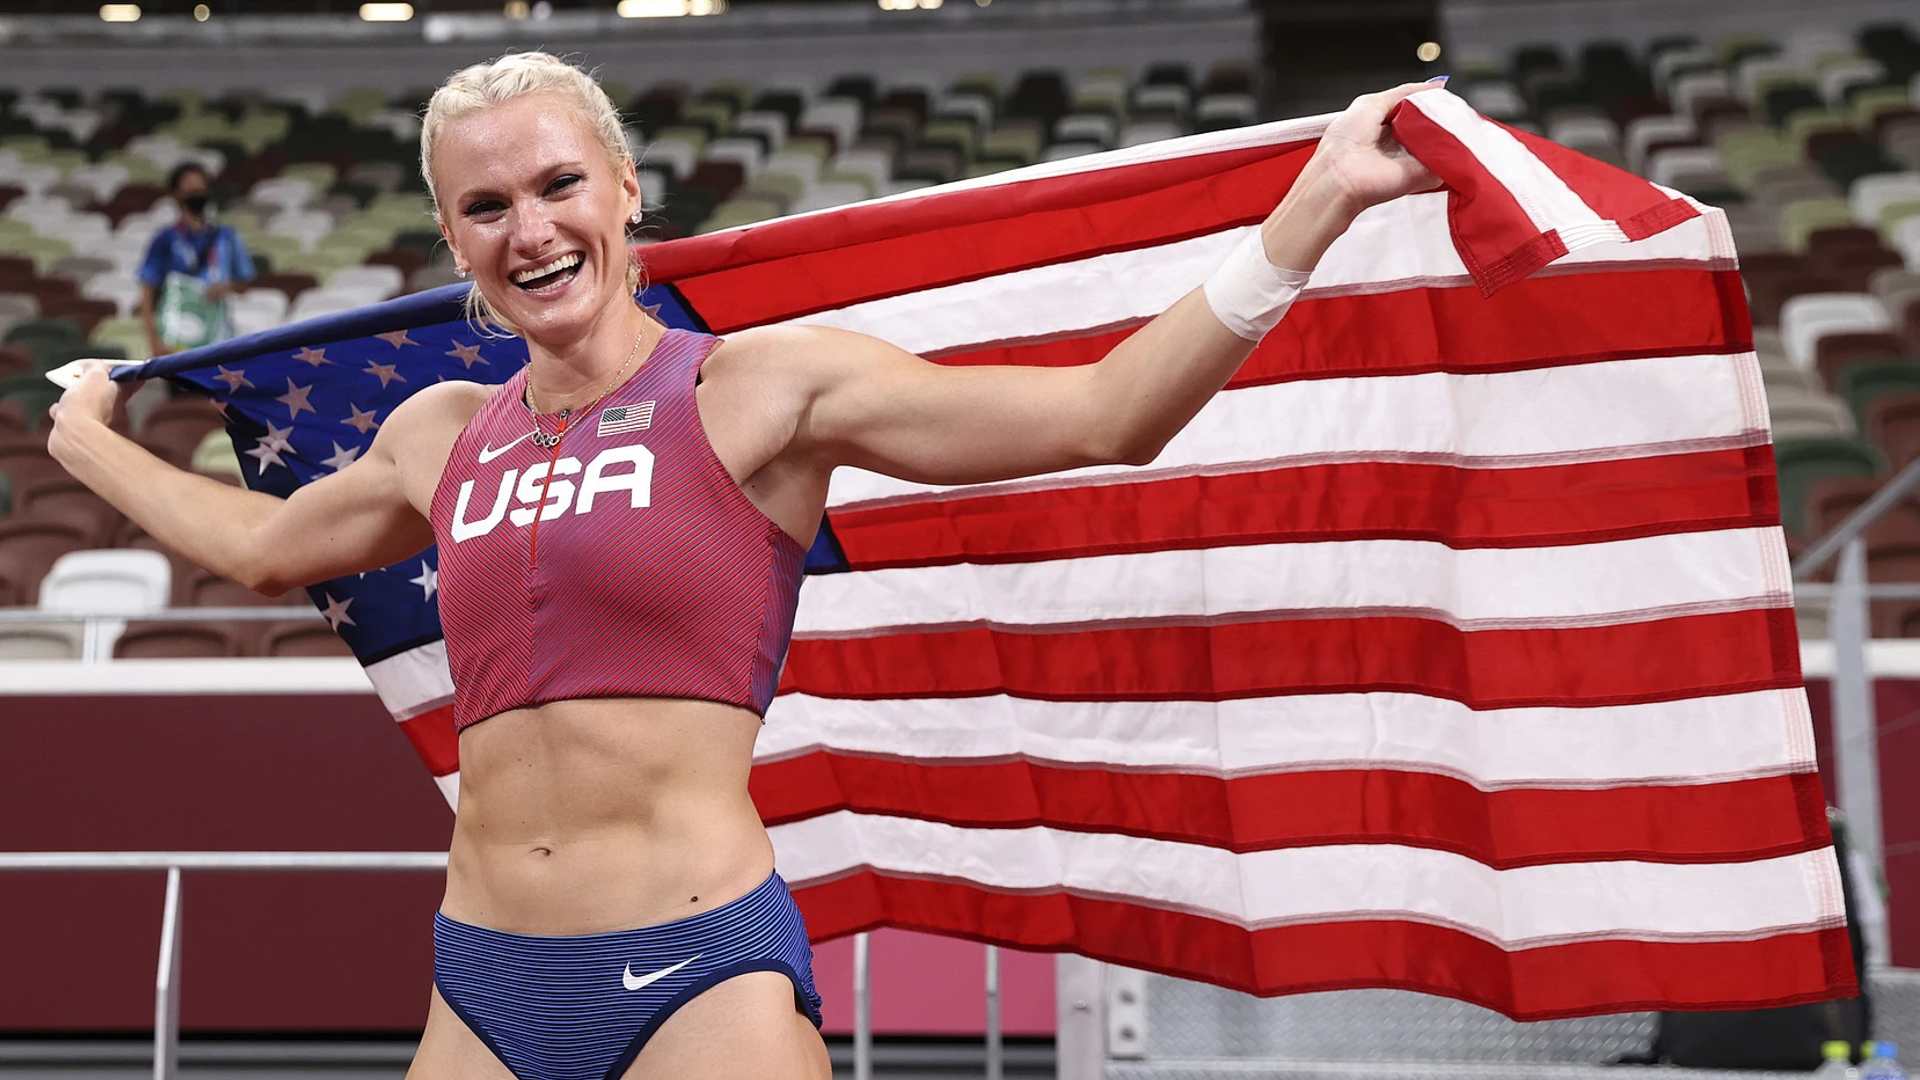 Katie Moon after winning the gold medal at Tokyo Olympics 2020 (Image Credits - USATF)